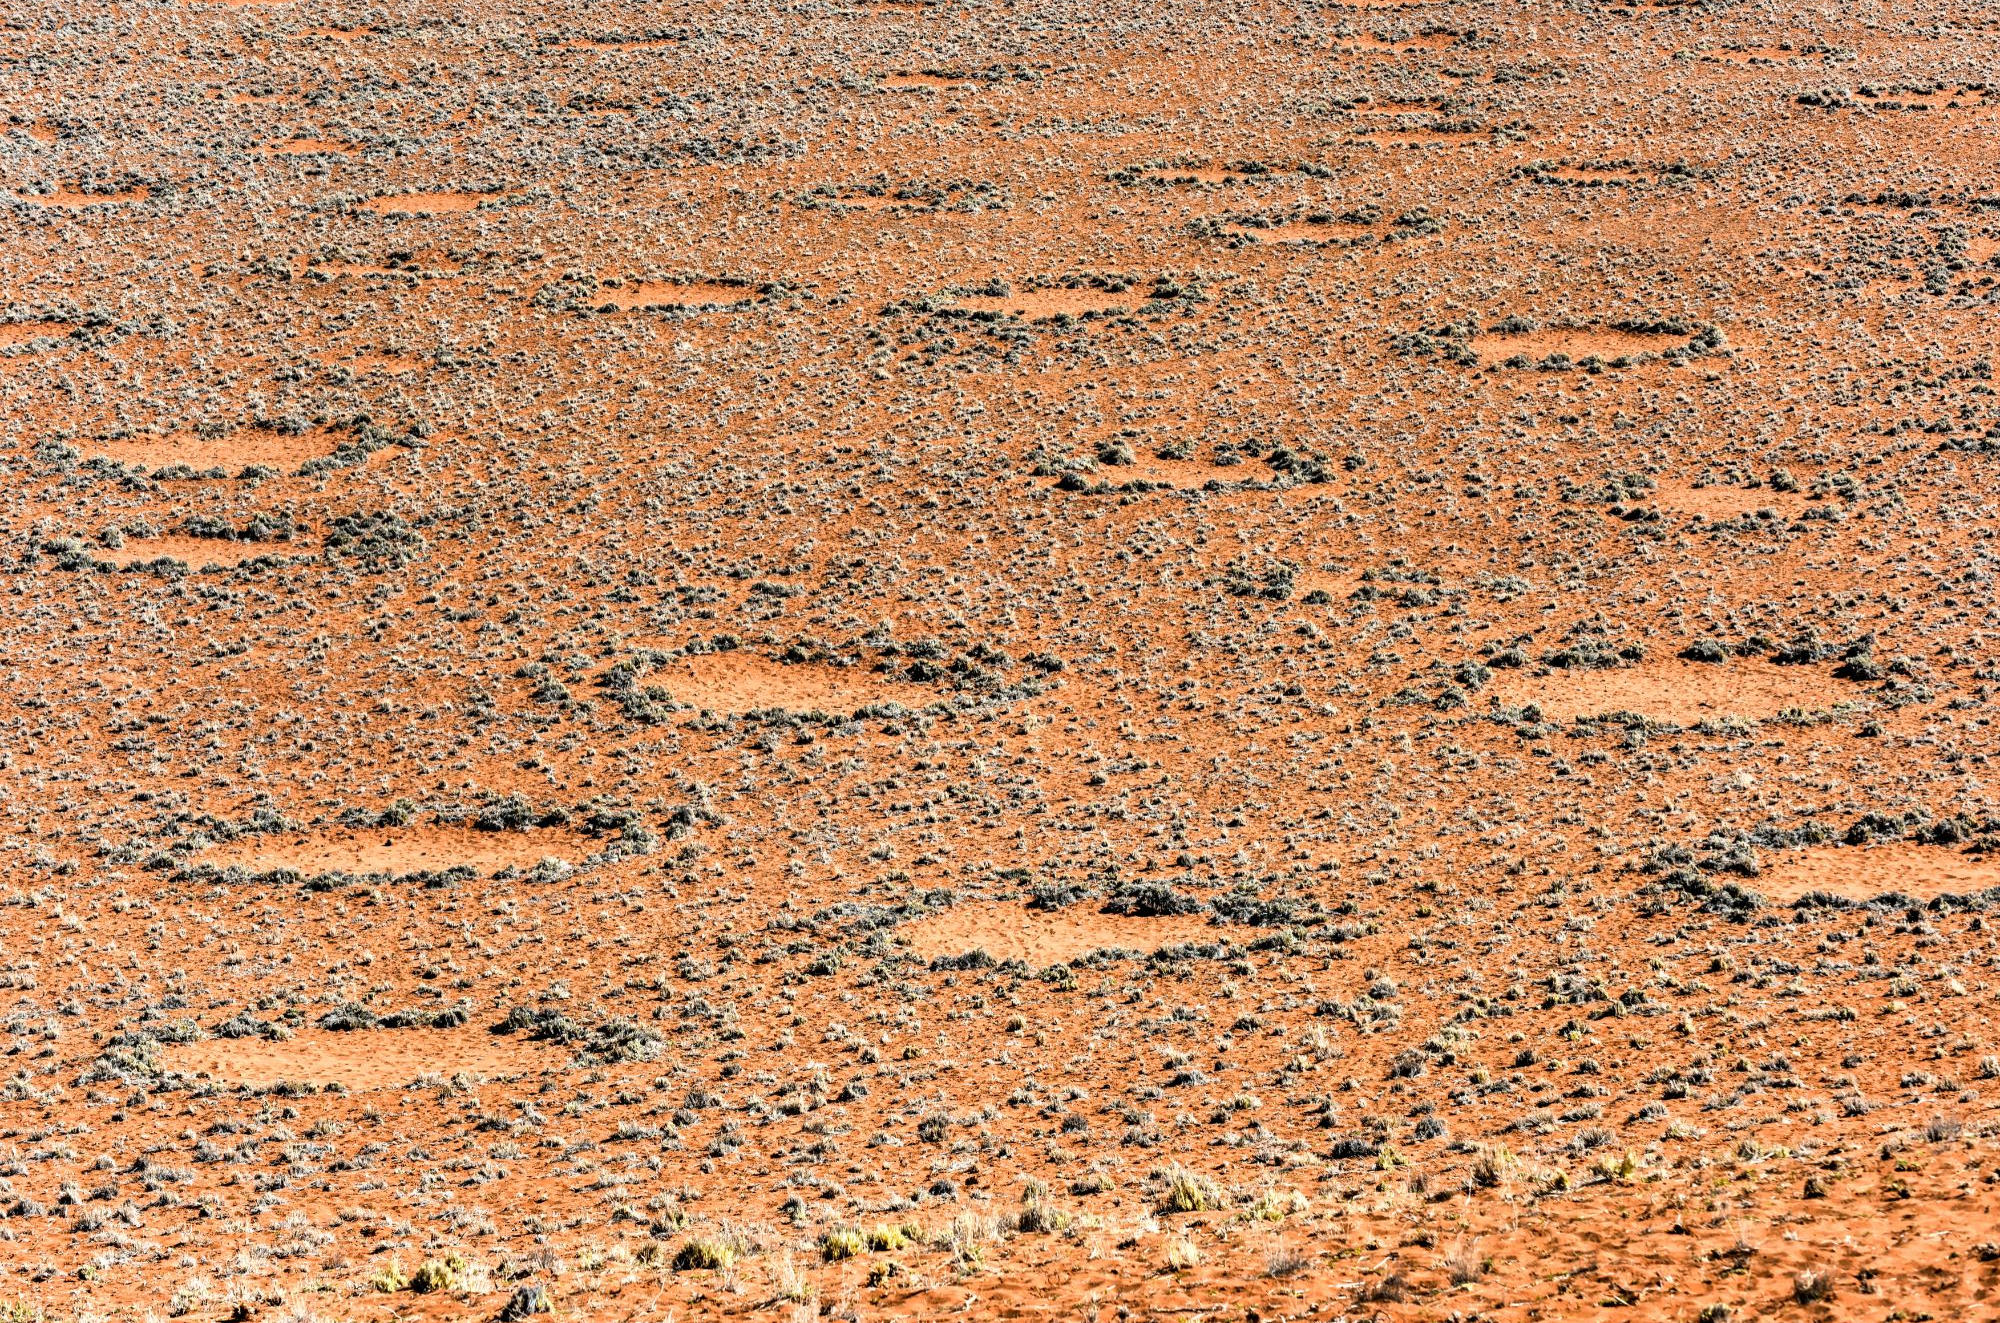 Scientists Discover Mysterious “Fairy Circles” at Hundreds of Sites Globally